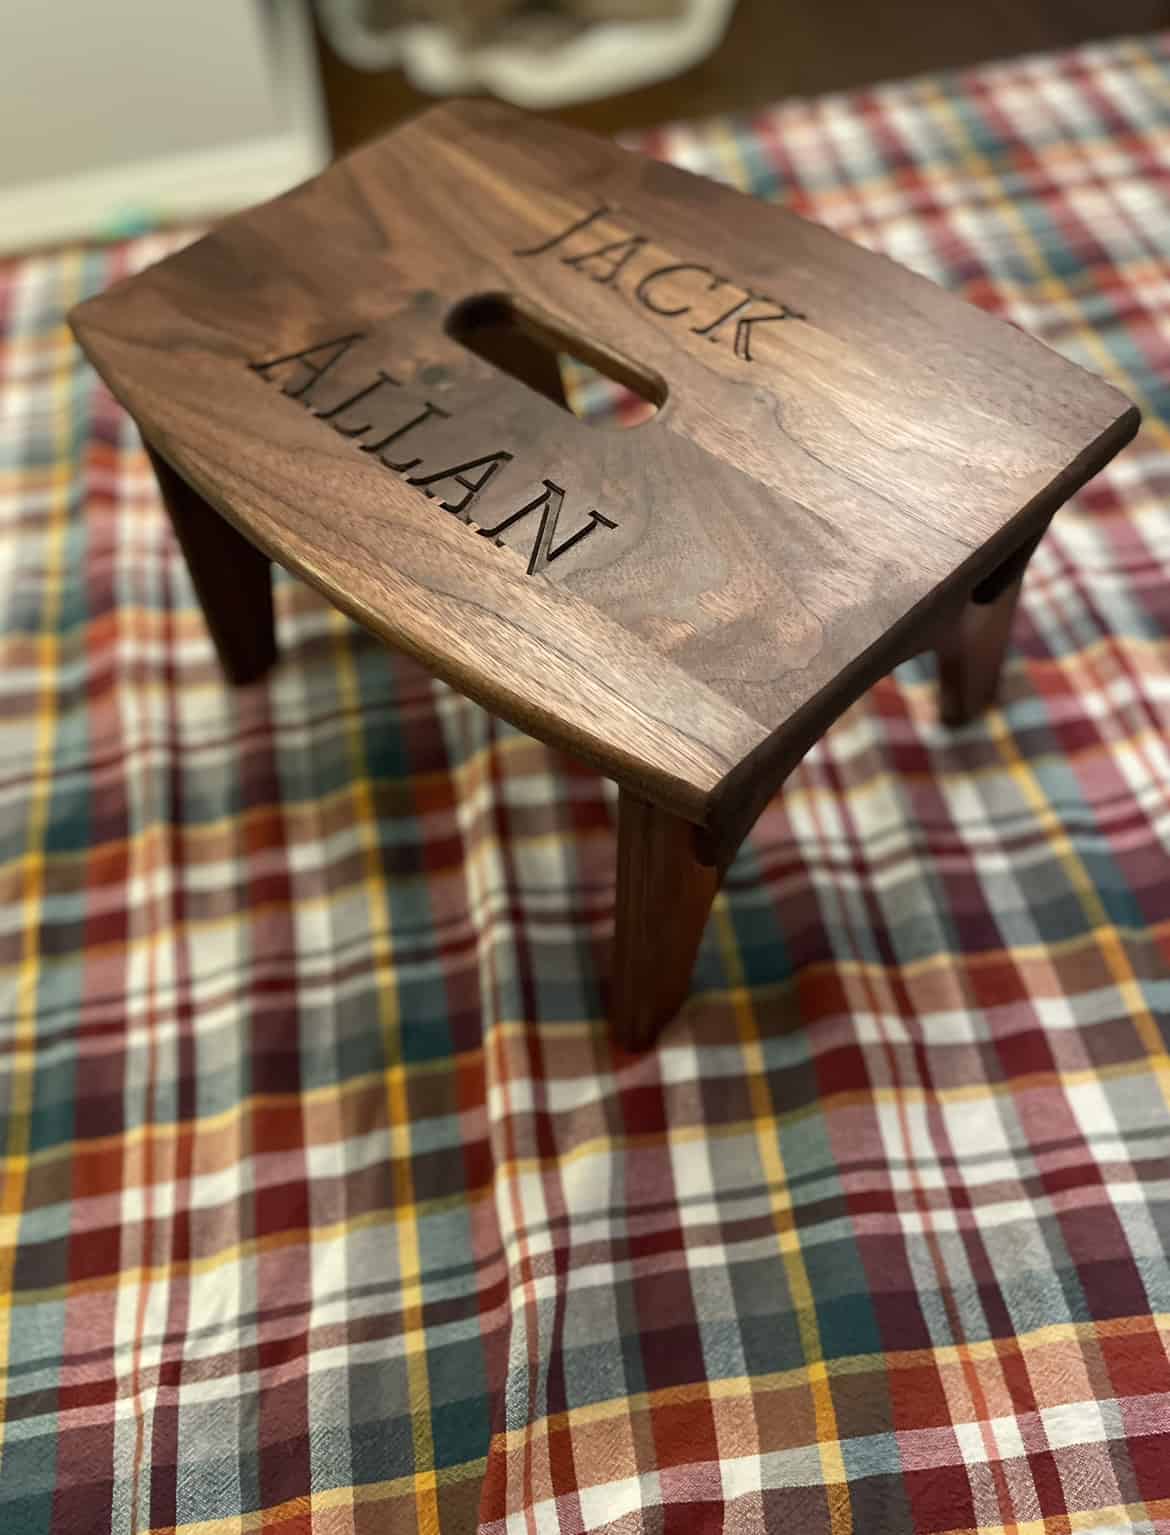 Classic Children's Stool - Clines Crafted Woodworking LLC